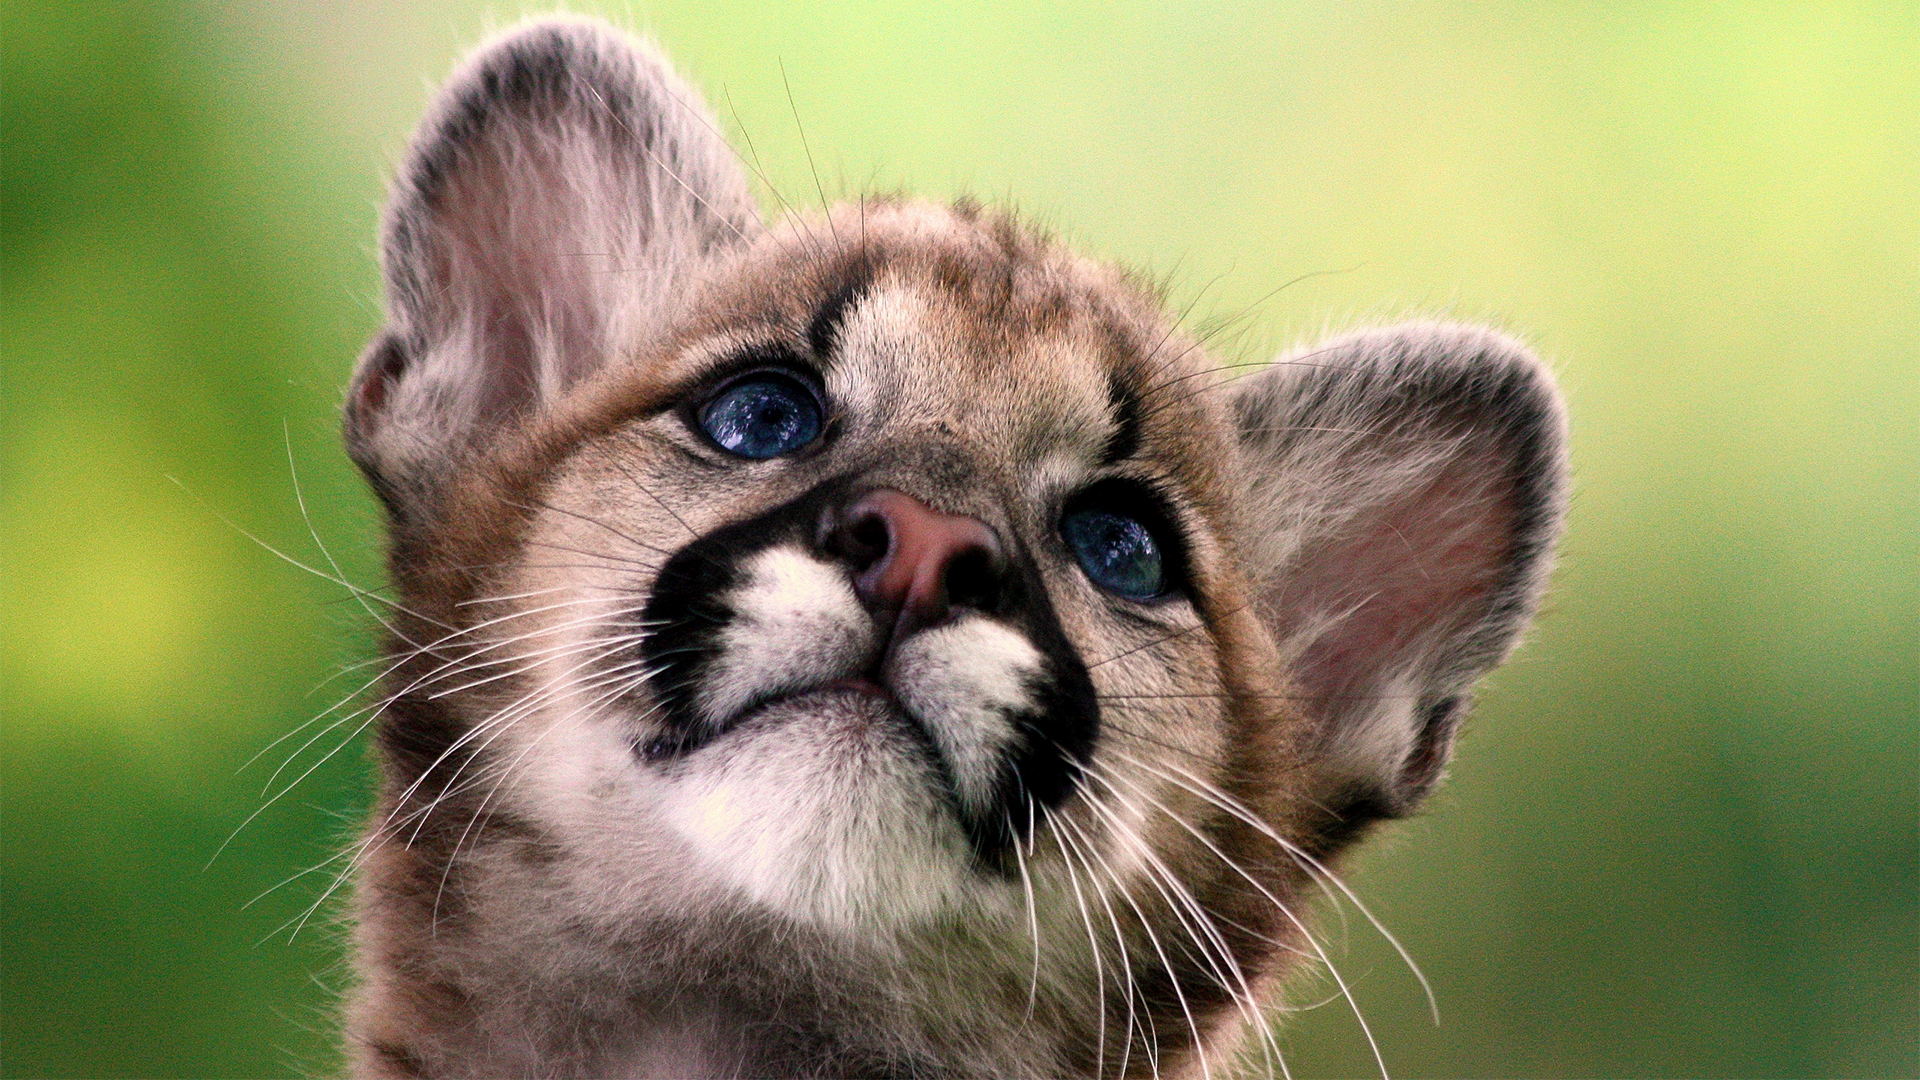 Animal Baby Pictures on Cubs Mountain Lions Baby Animals Hd Wallpaper   Wild Animal   Reptiles